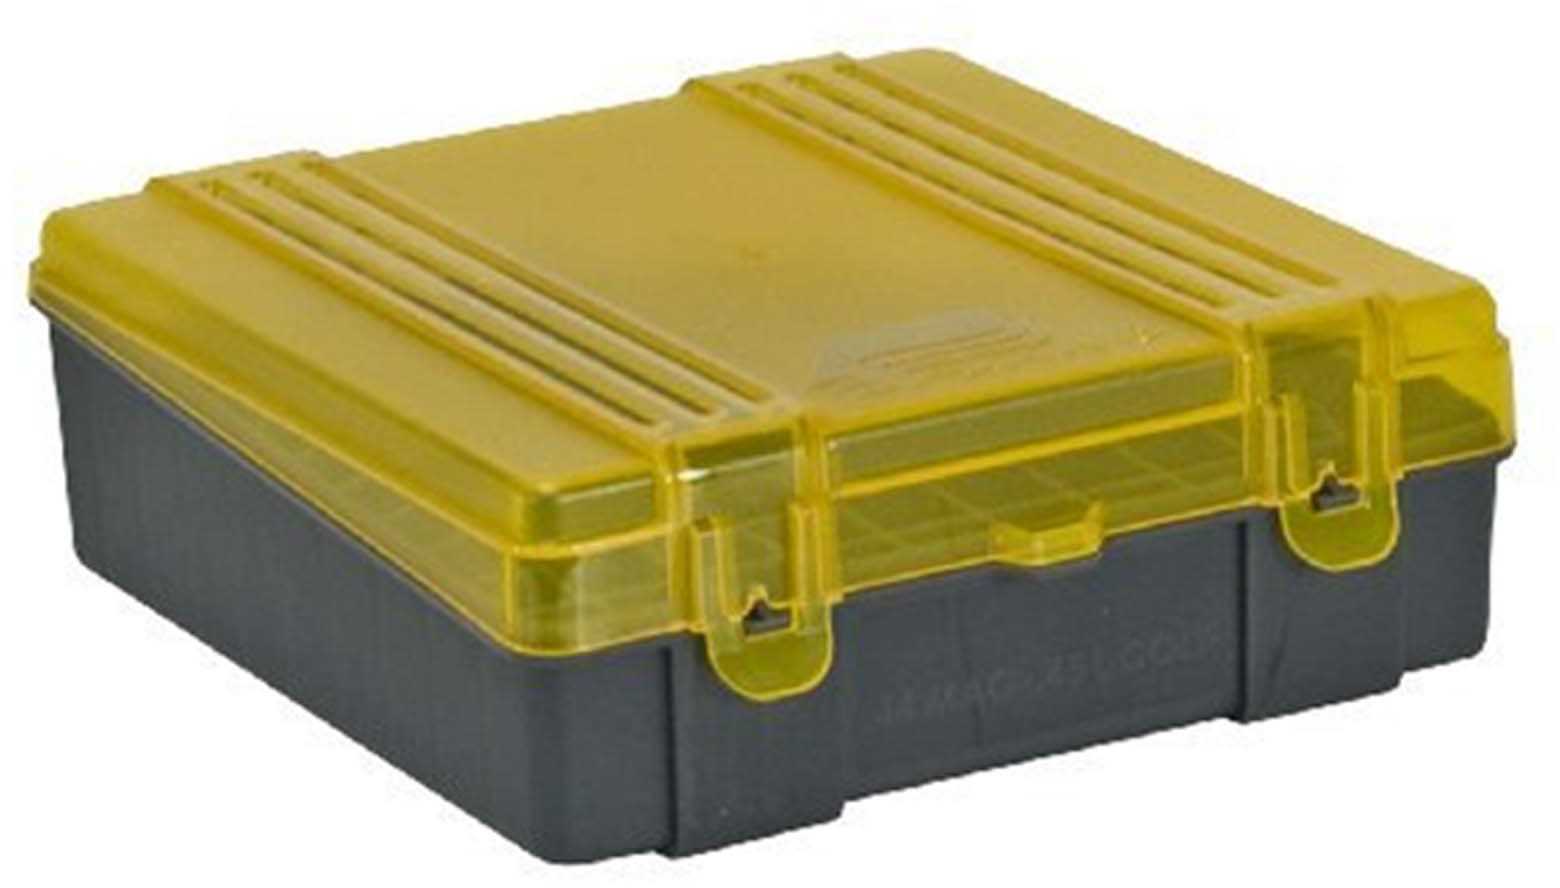 Plano Ammunition Box Ammo Case Holds 100 Rounds Flip Top .44-.45LC Charcoal/Yellow